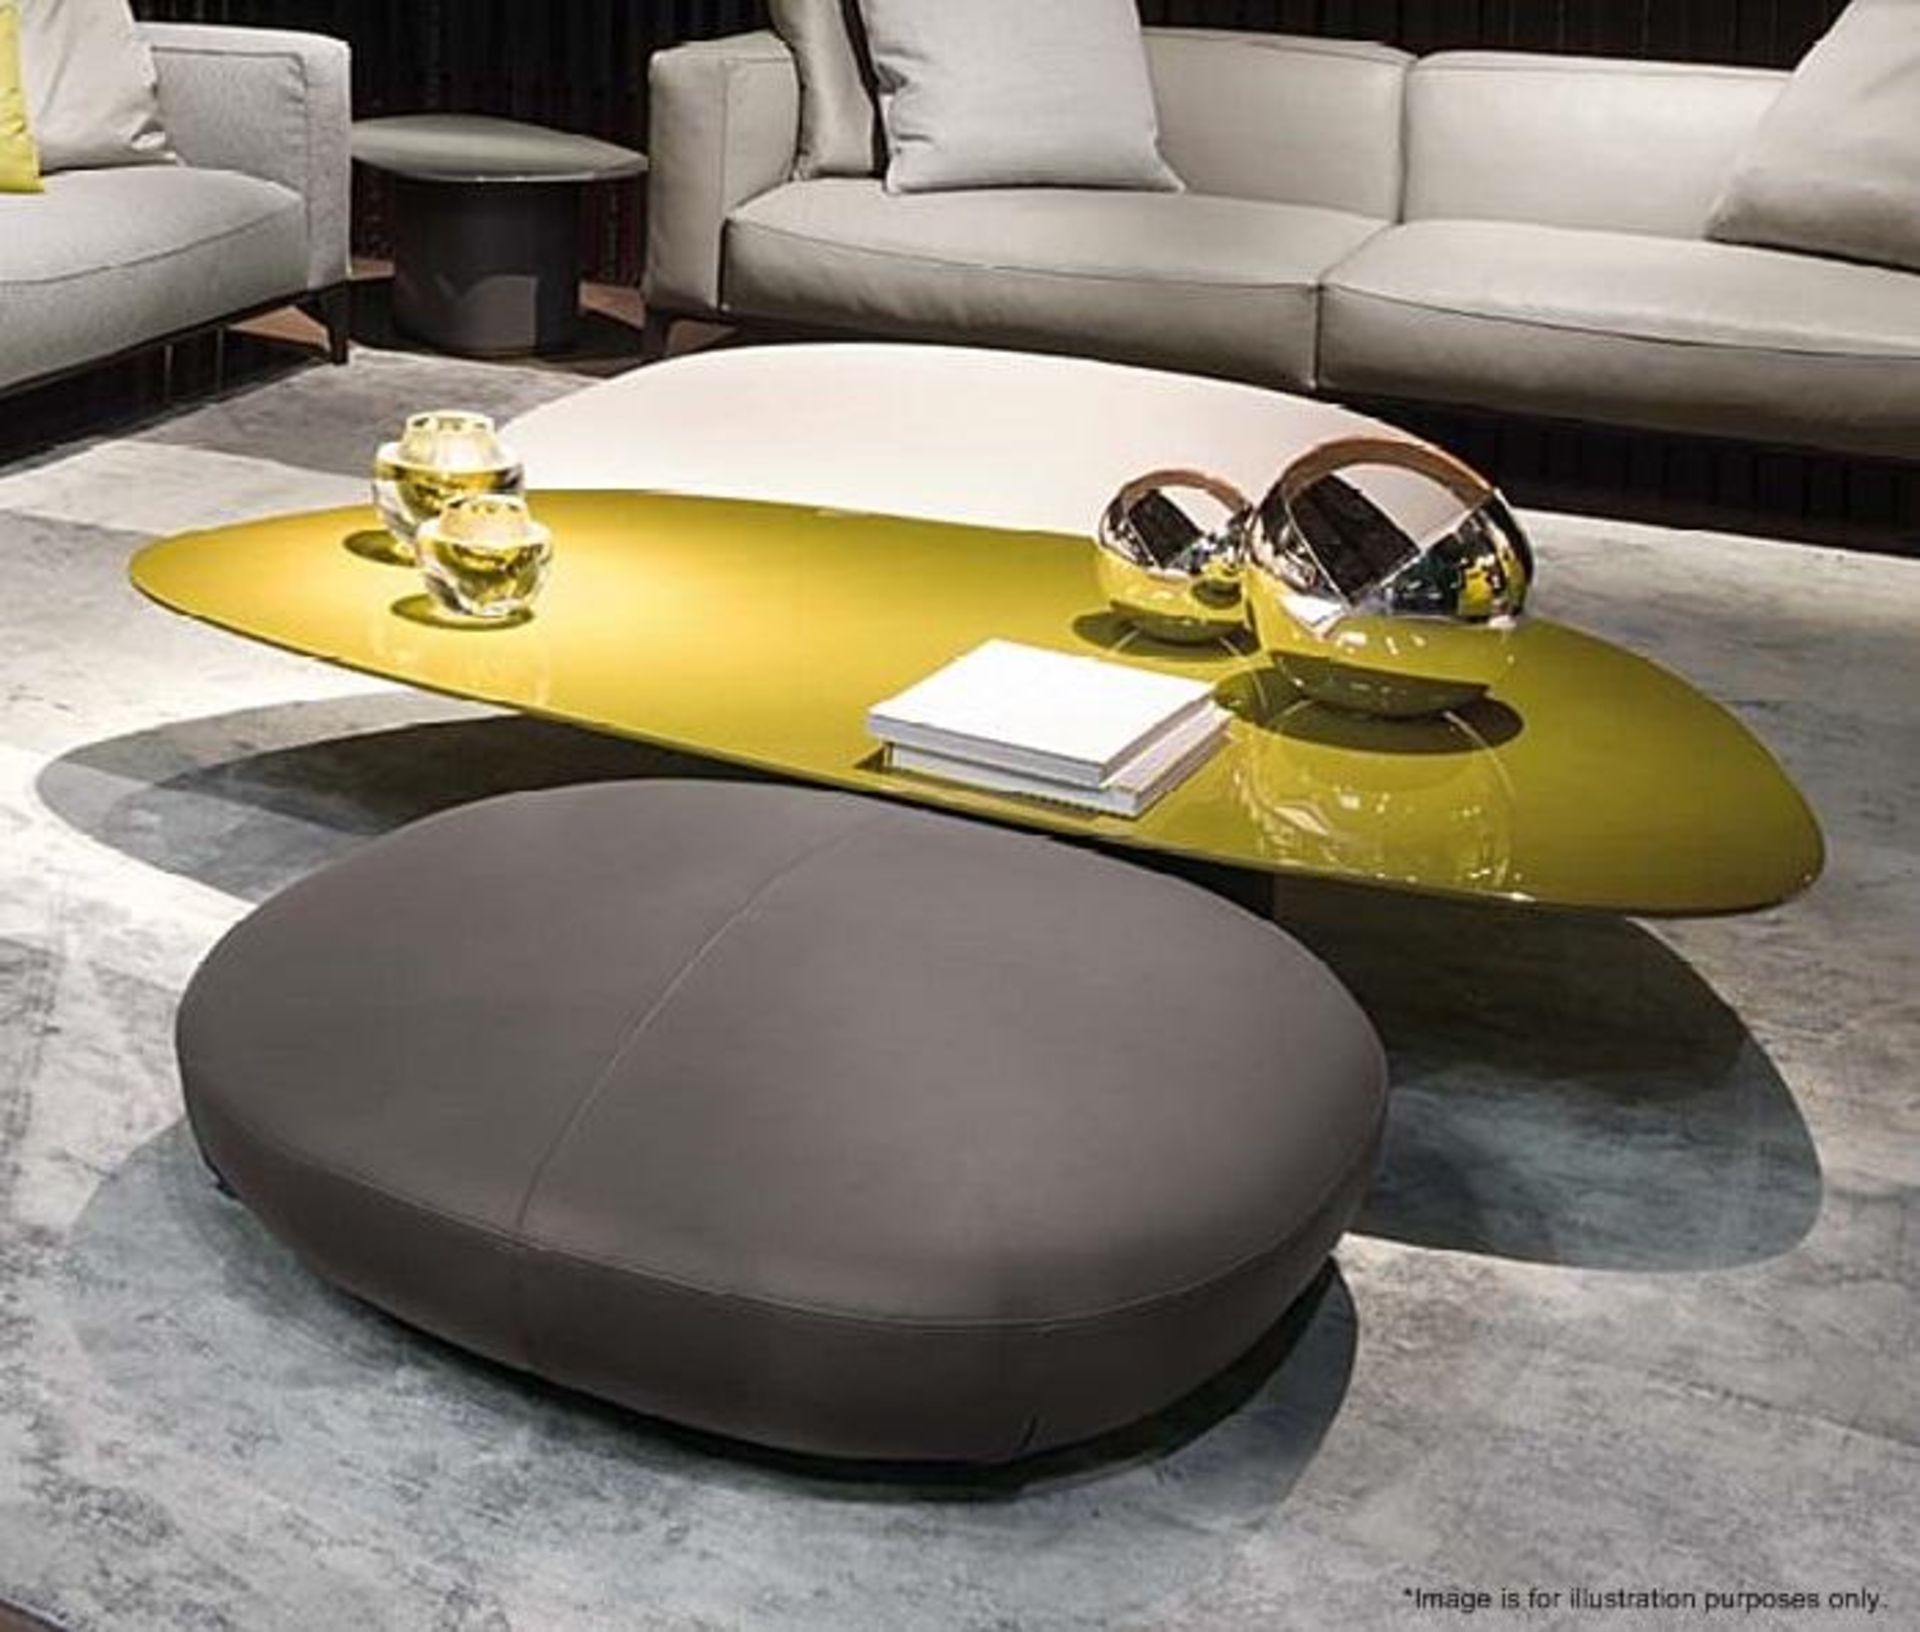 1 x Giorgetti 'Galet' Leather Upholstered Designer Table - Dimensions: 135 x 100cm - Ref: 5747490 P2